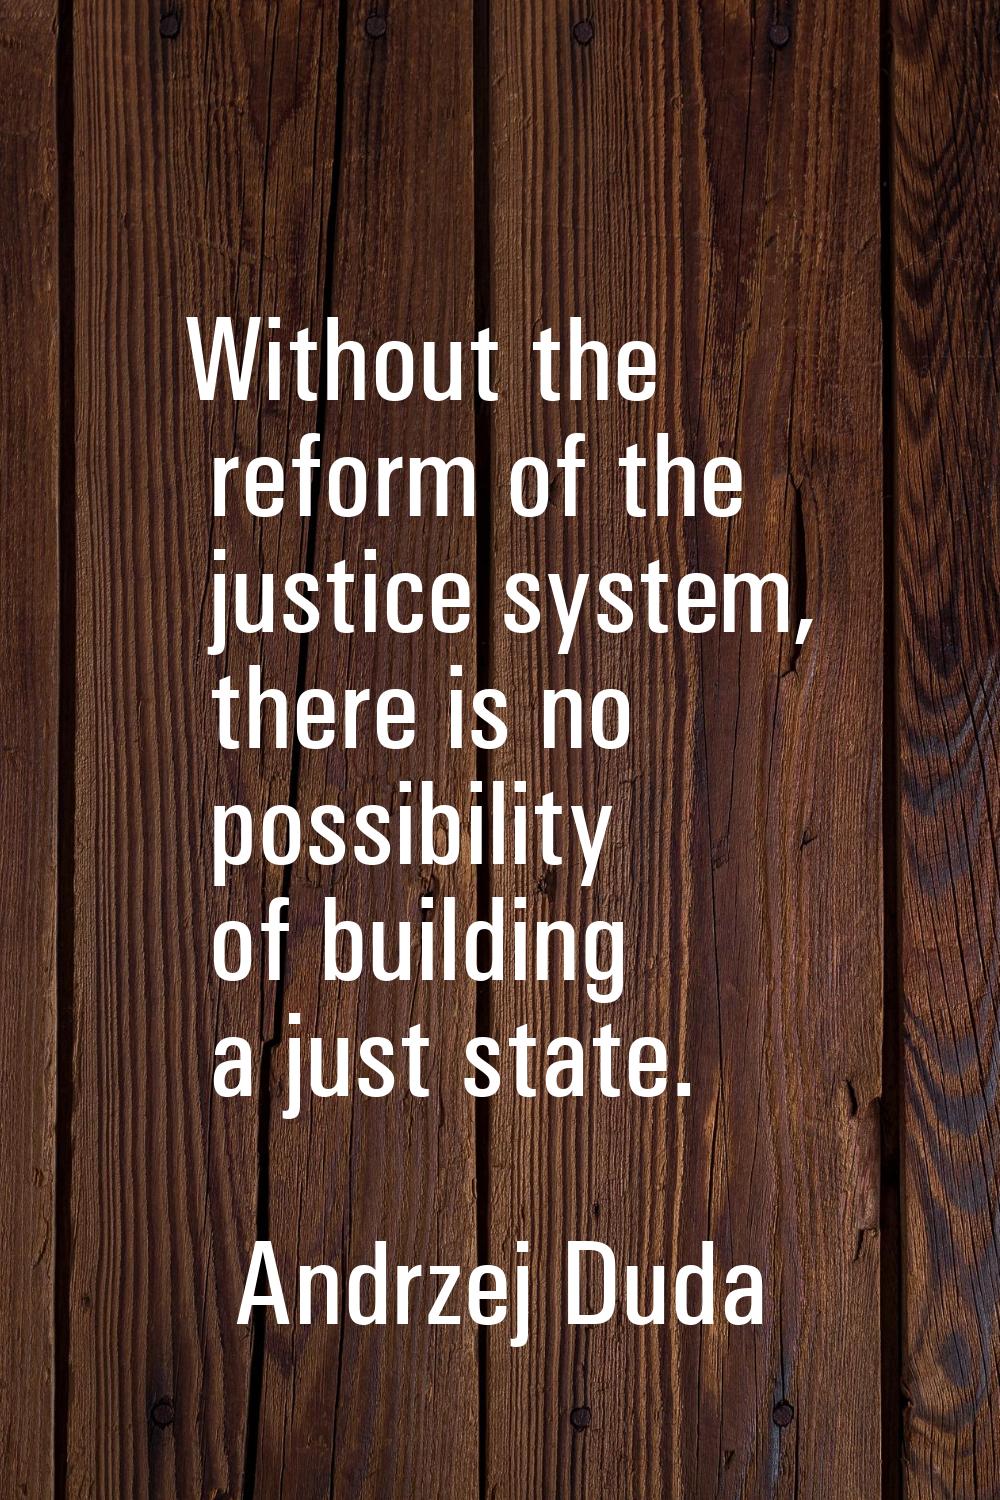 Without the reform of the justice system, there is no possibility of building a just state.